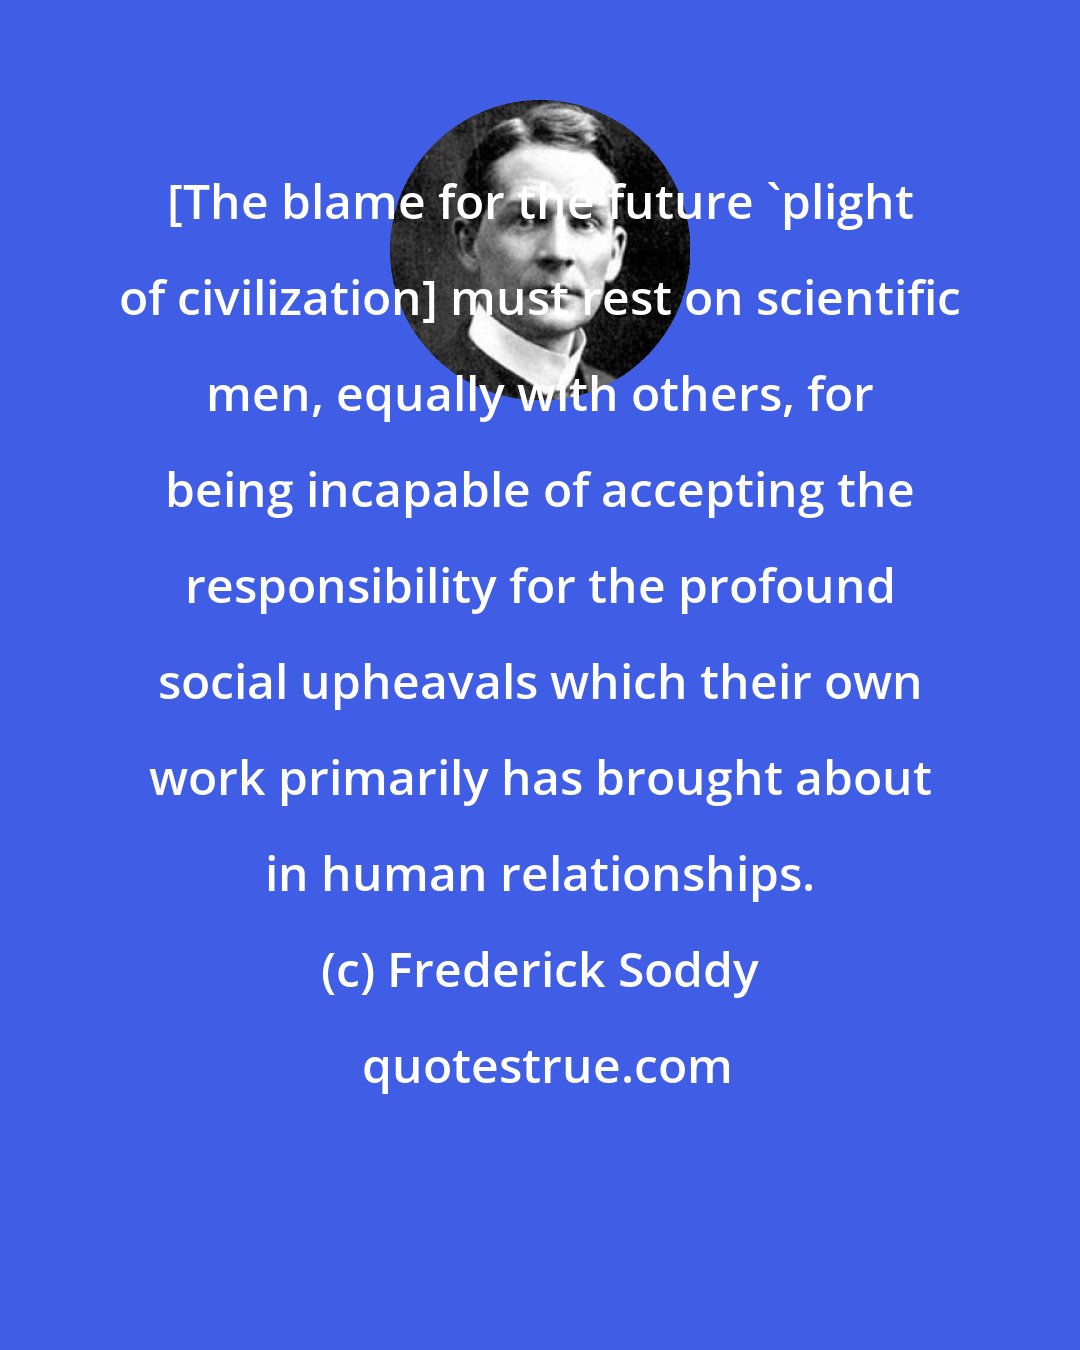 Frederick Soddy: [The blame for the future 'plight of civilization] must rest on scientific men, equally with others, for being incapable of accepting the responsibility for the profound social upheavals which their own work primarily has brought about in human relationships.